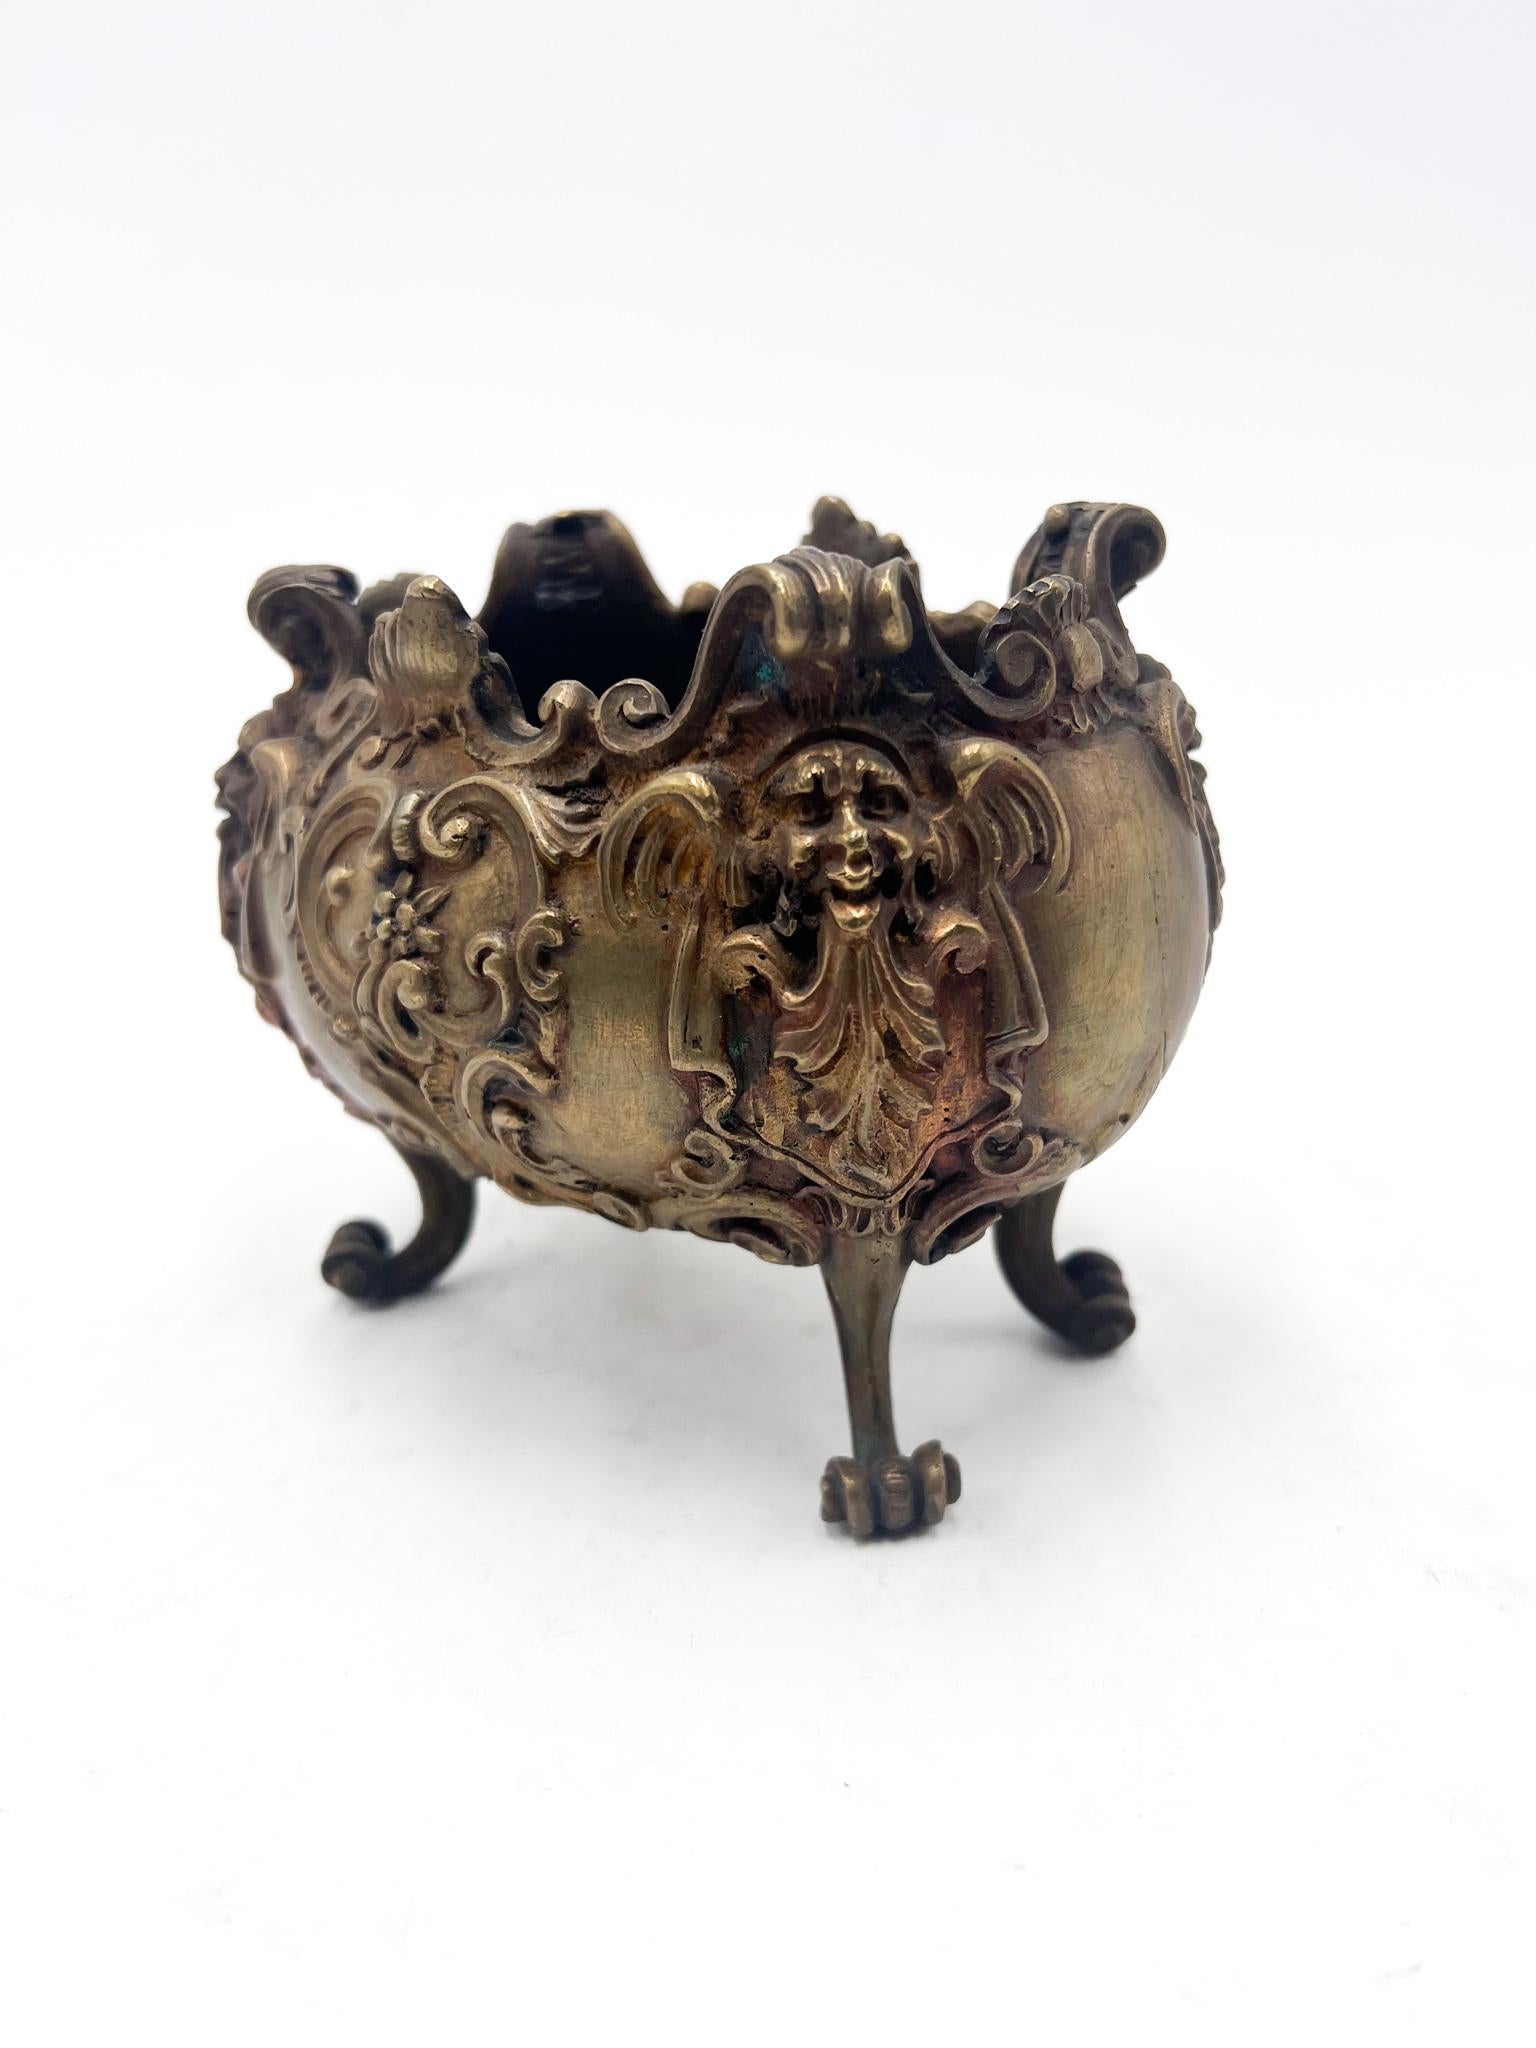 Bronze cup made by Antonio Pandiani in 1800.

Measures: Ø 12 cm Ø 10 cm h 10 cm

Antonio Pandiani was born in Milan in 1838 and died there in 1928.  

He was a great neoclassical sculptor belonging to the well-known artistic and industrial dynasty